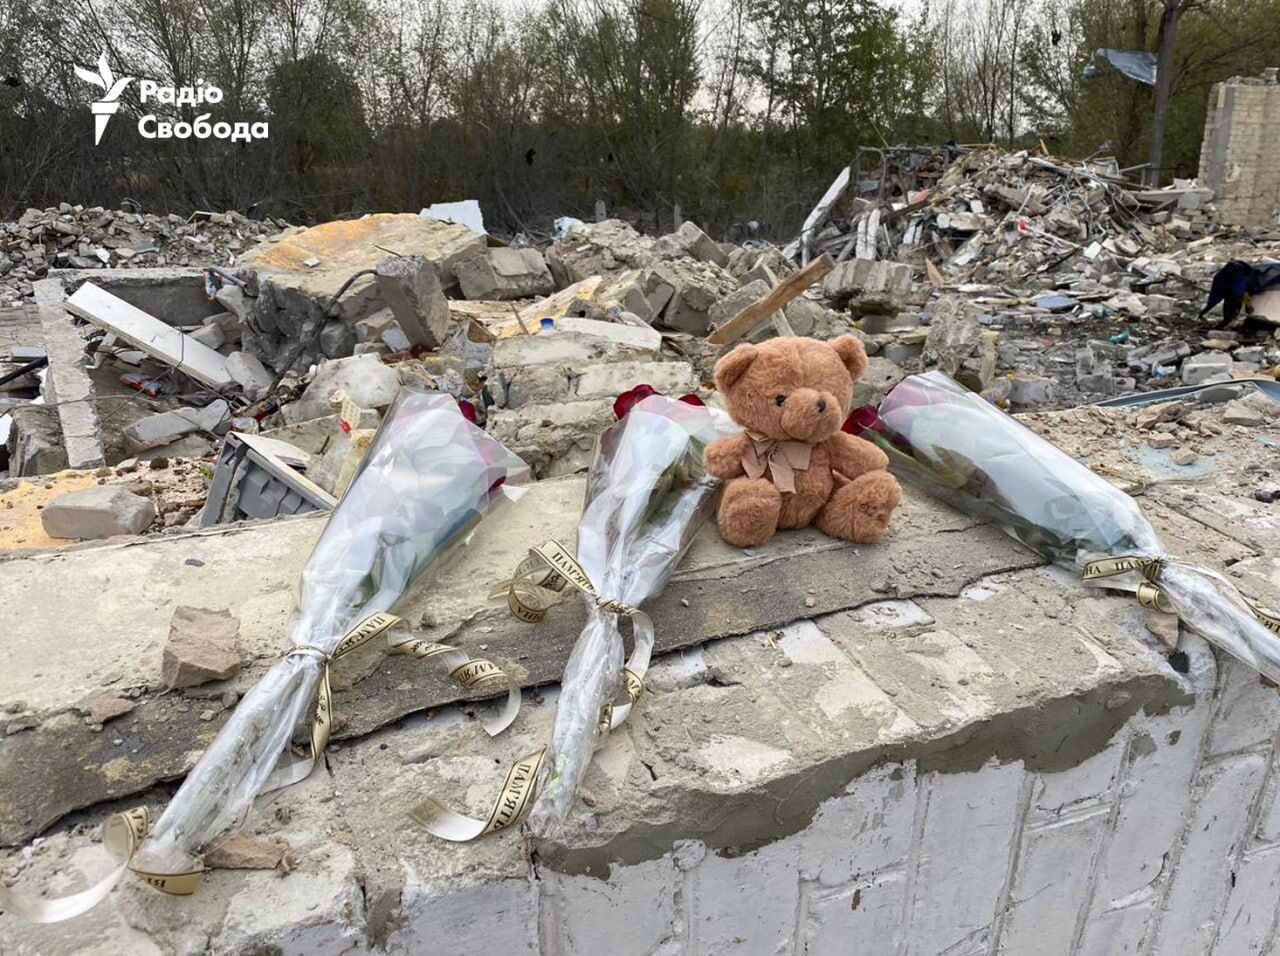 : r''There is a coffin in every house''esident of Hroza tells about the tragedy, flowers are brought to the site of the Russian strike. Photos and videos